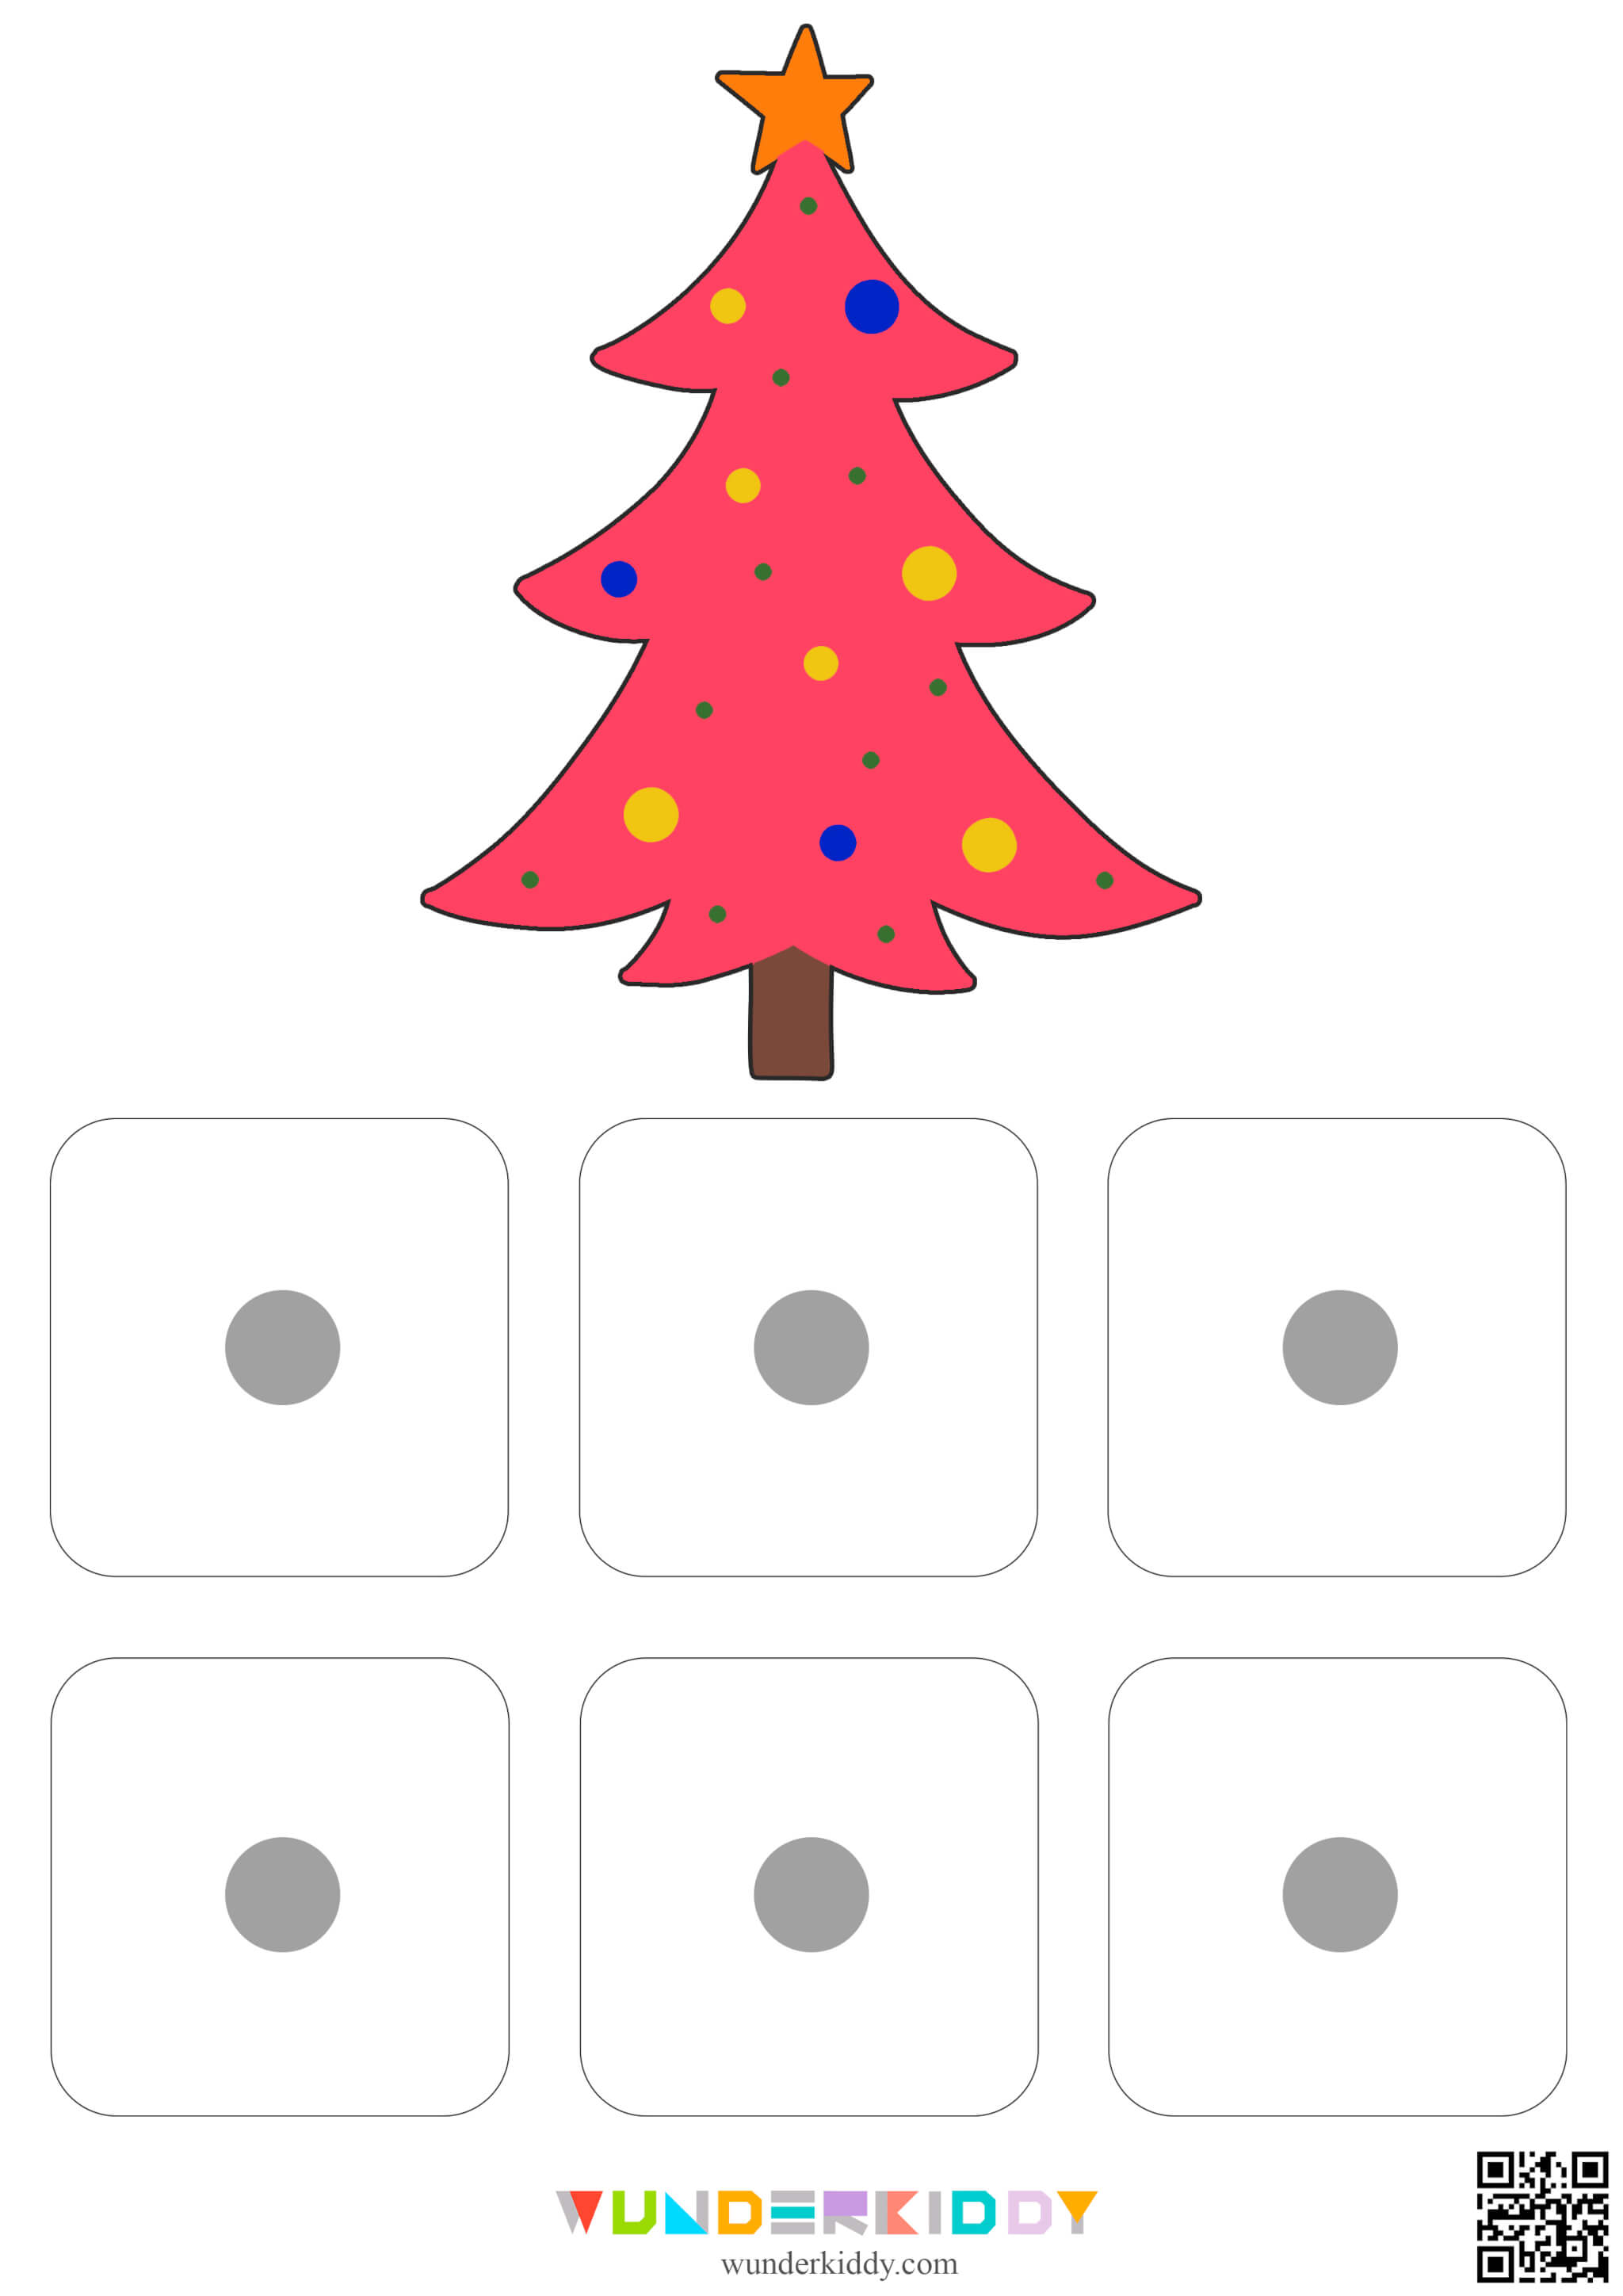 Christmas Color Sorting Activity - Image 3